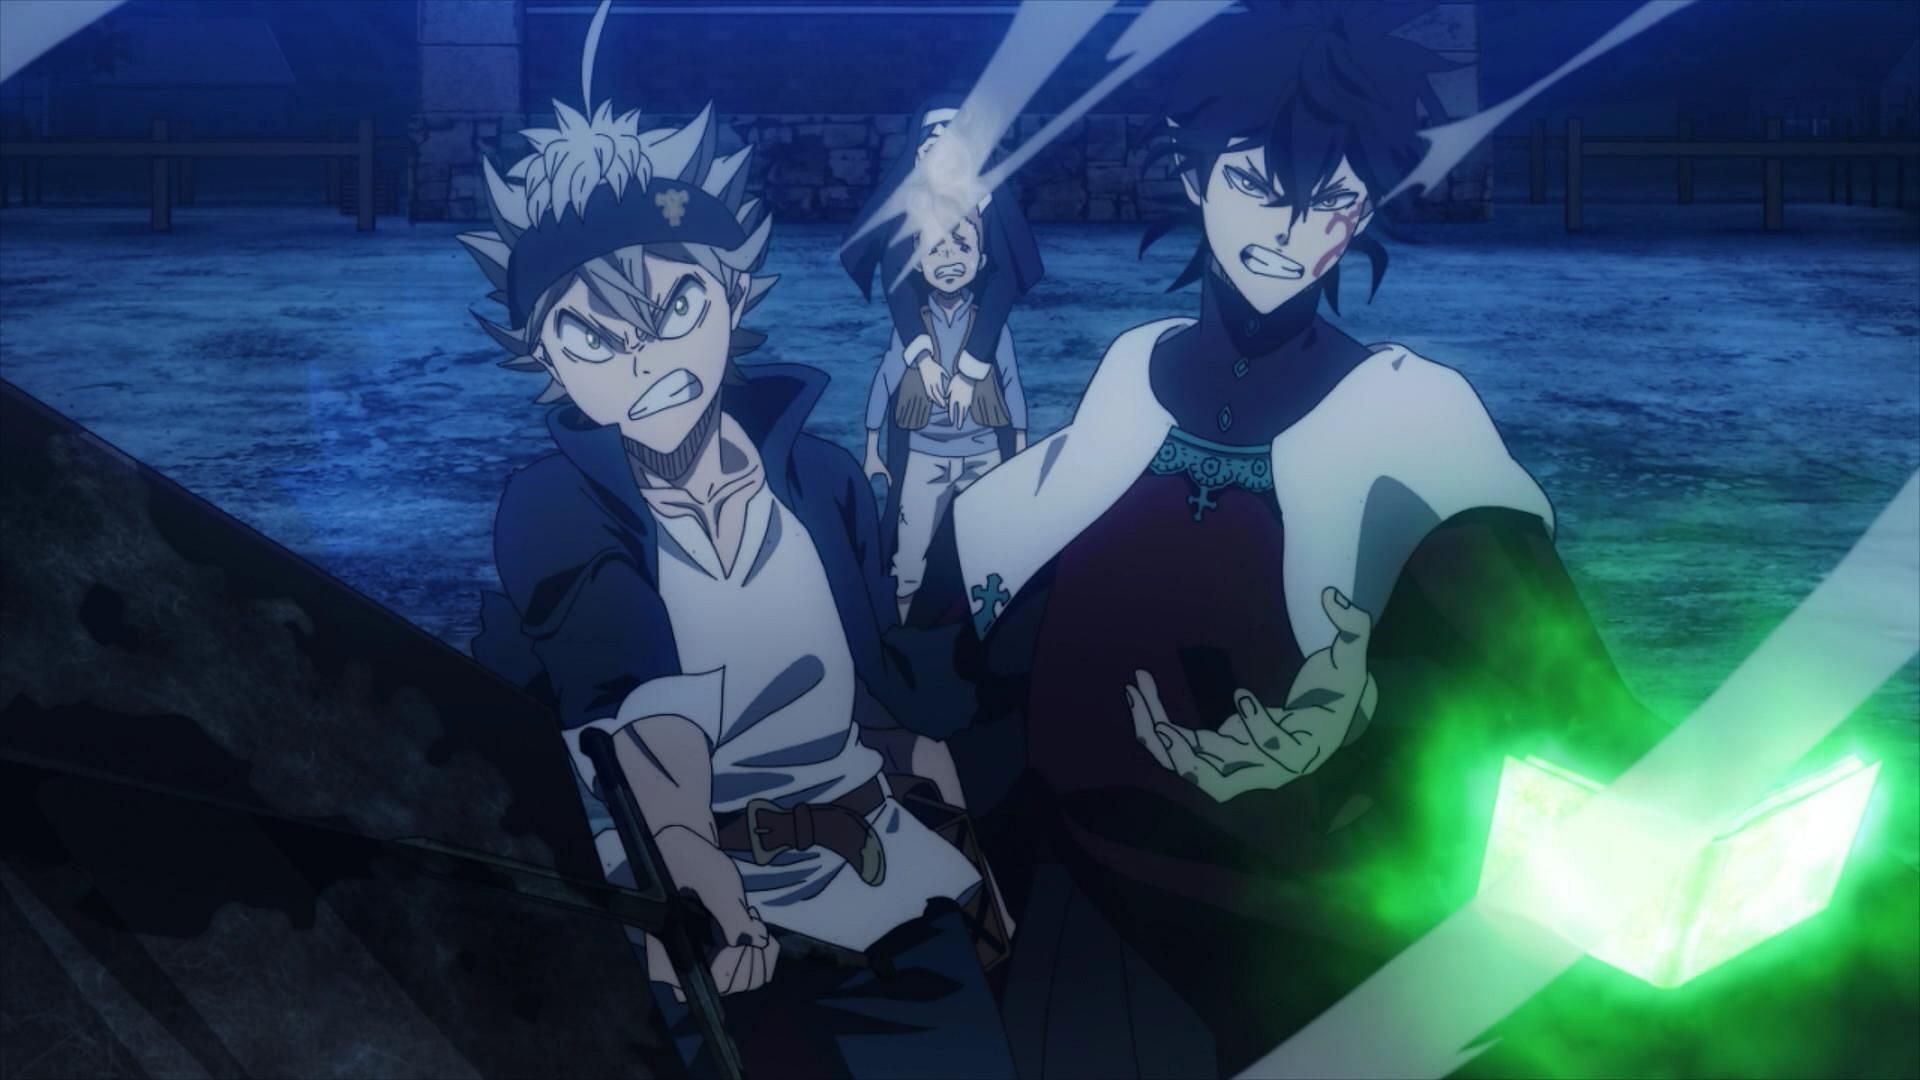 Black Clover chapter 370 spoilers: Yuno and Asta fight the real Lucius as Black Bulls take out clones (Image via Pierrot)